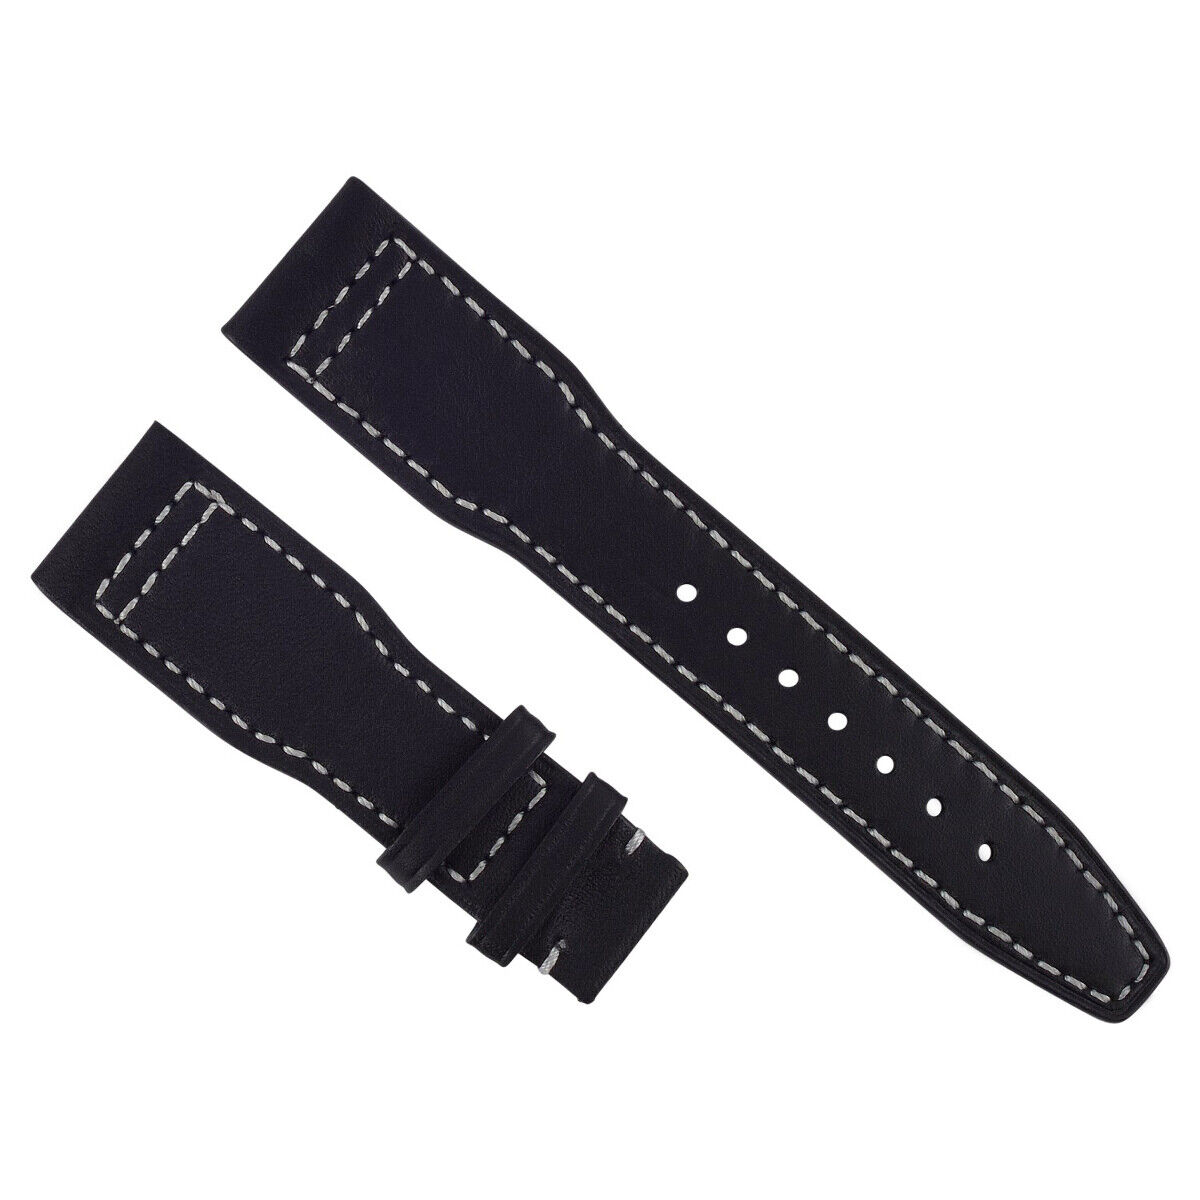 22MM CALF LEATHER WATCH STRAP BAND DEPLOYMENT CLASP FOR IWC WATCH PILOT BLACK WS